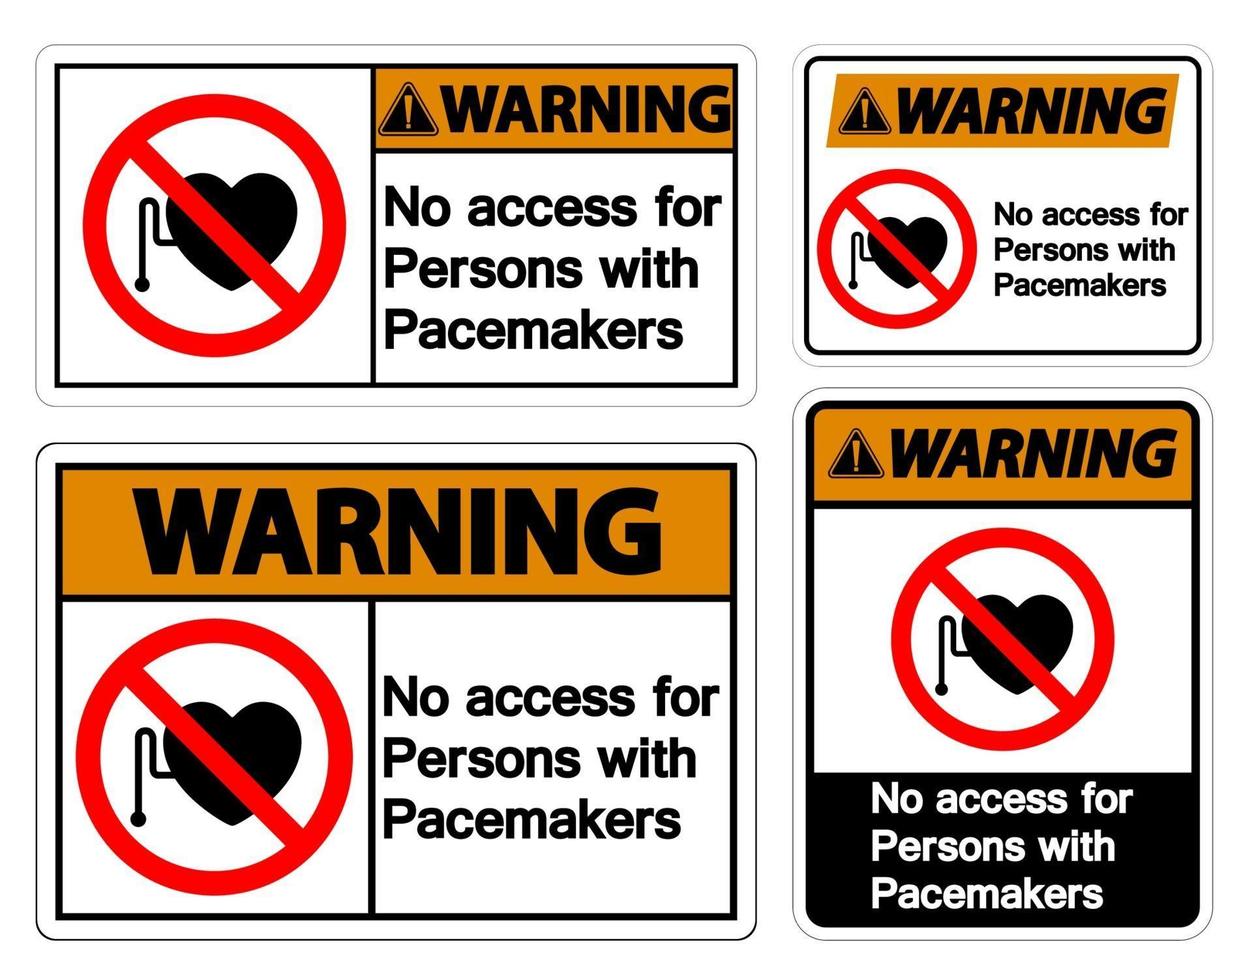 Warning No Access For Persons With Pacemaker Symbol Sign On White Background vector